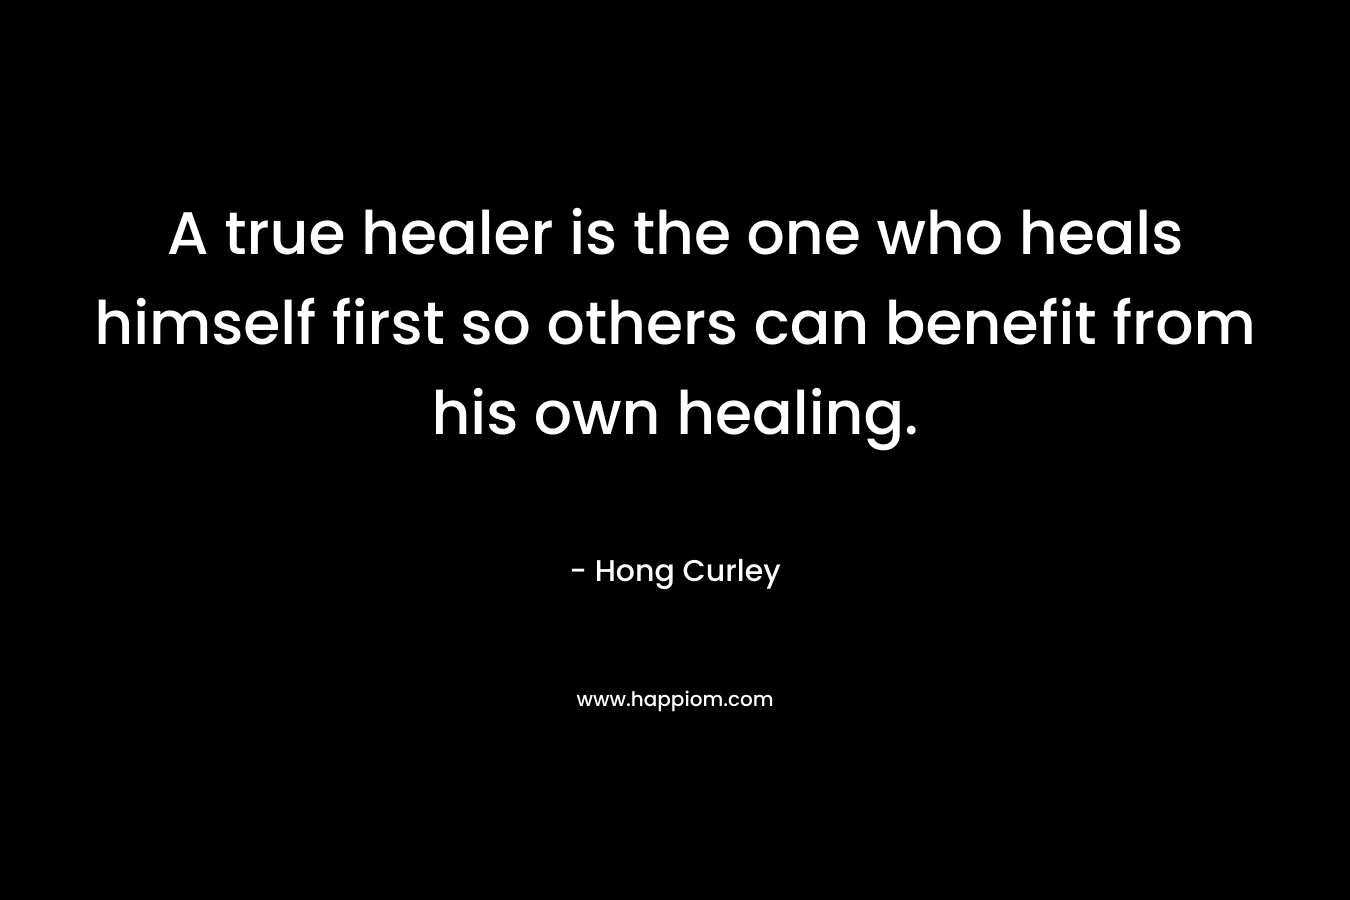 A true healer is the one who heals himself first so others can benefit from his own healing. – Hong Curley